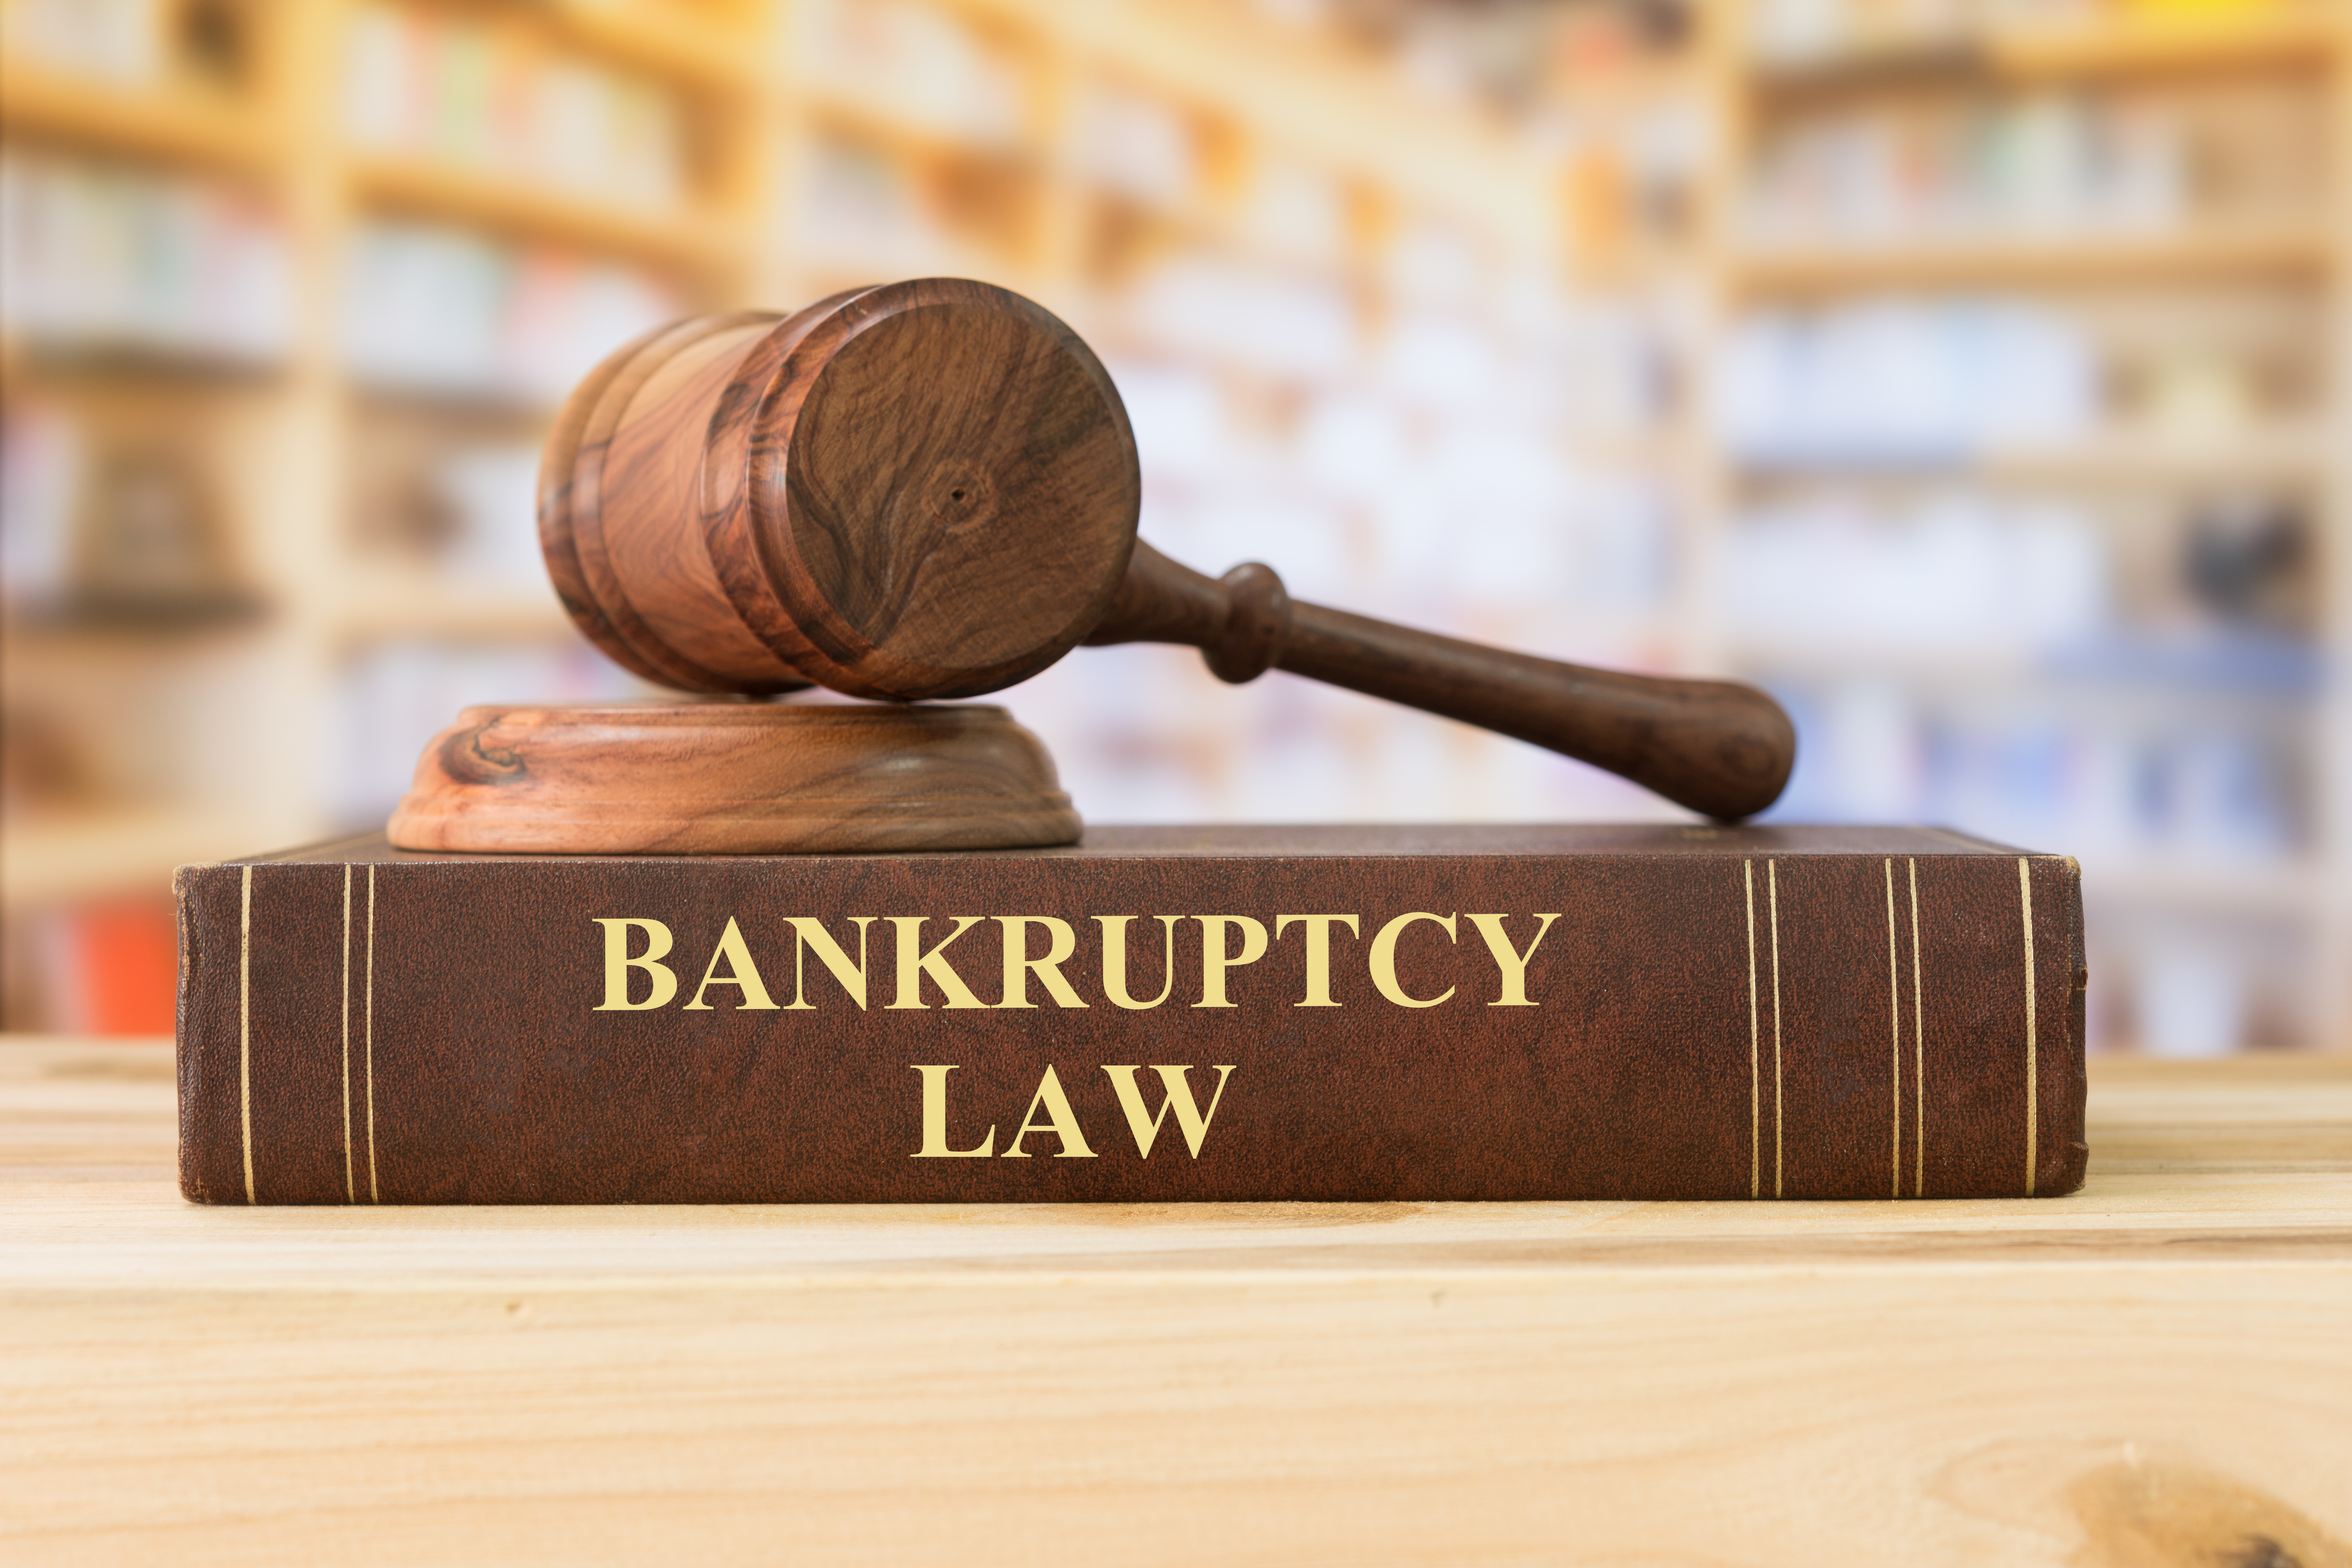 Speak with Chapter 13 California Bankruptcy Specialists at Price Law Group Call 866-210-1722